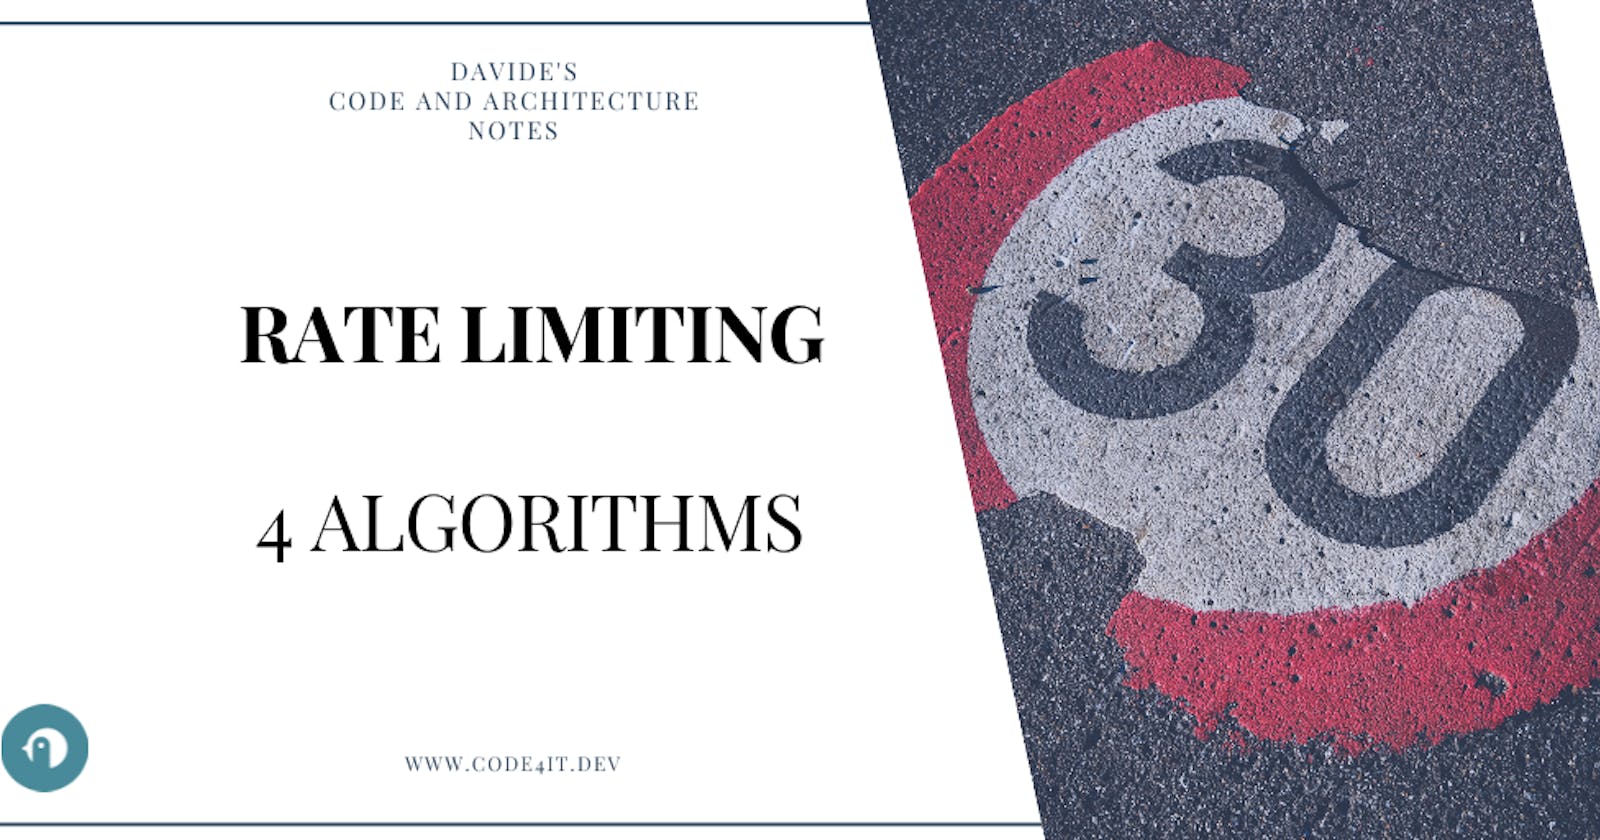 Davide's Code and Architecture Notes - 4 algorithms to implement Rate Limiting, with comparison